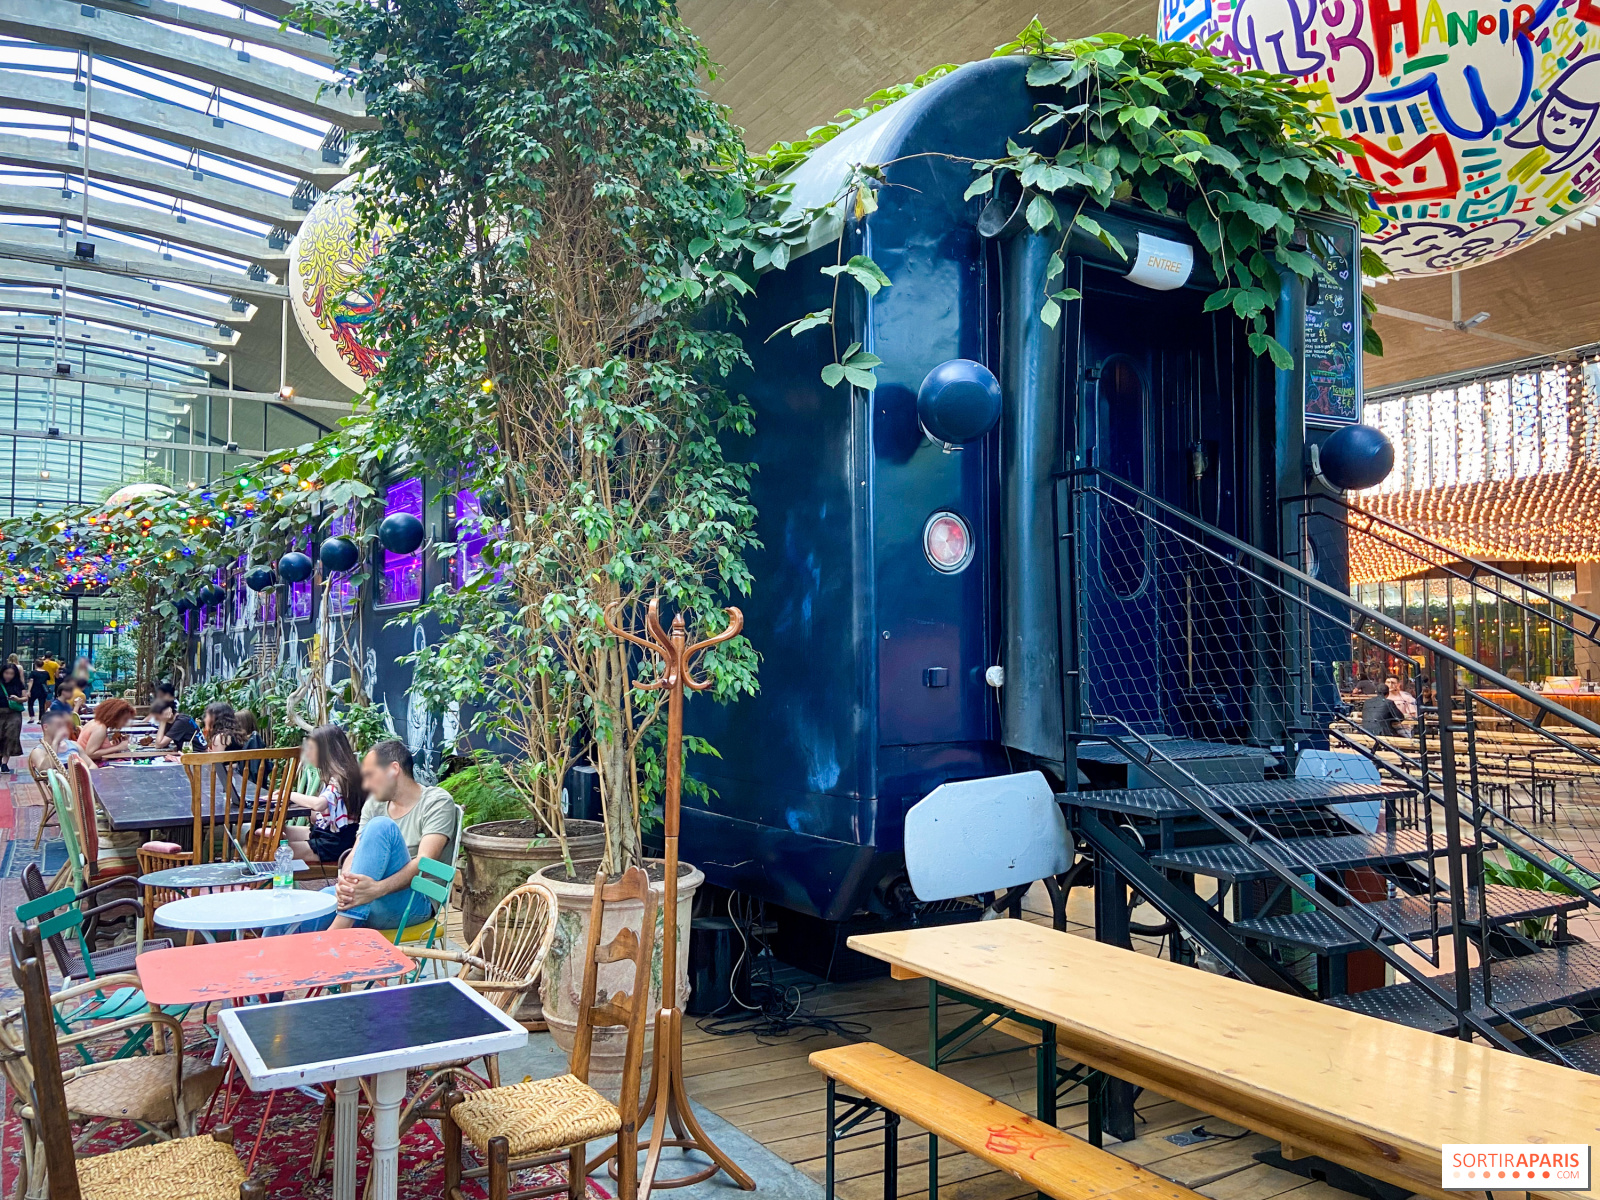 A dessert and ice cream train comes to a Big Mamma Food Court in Paris! 